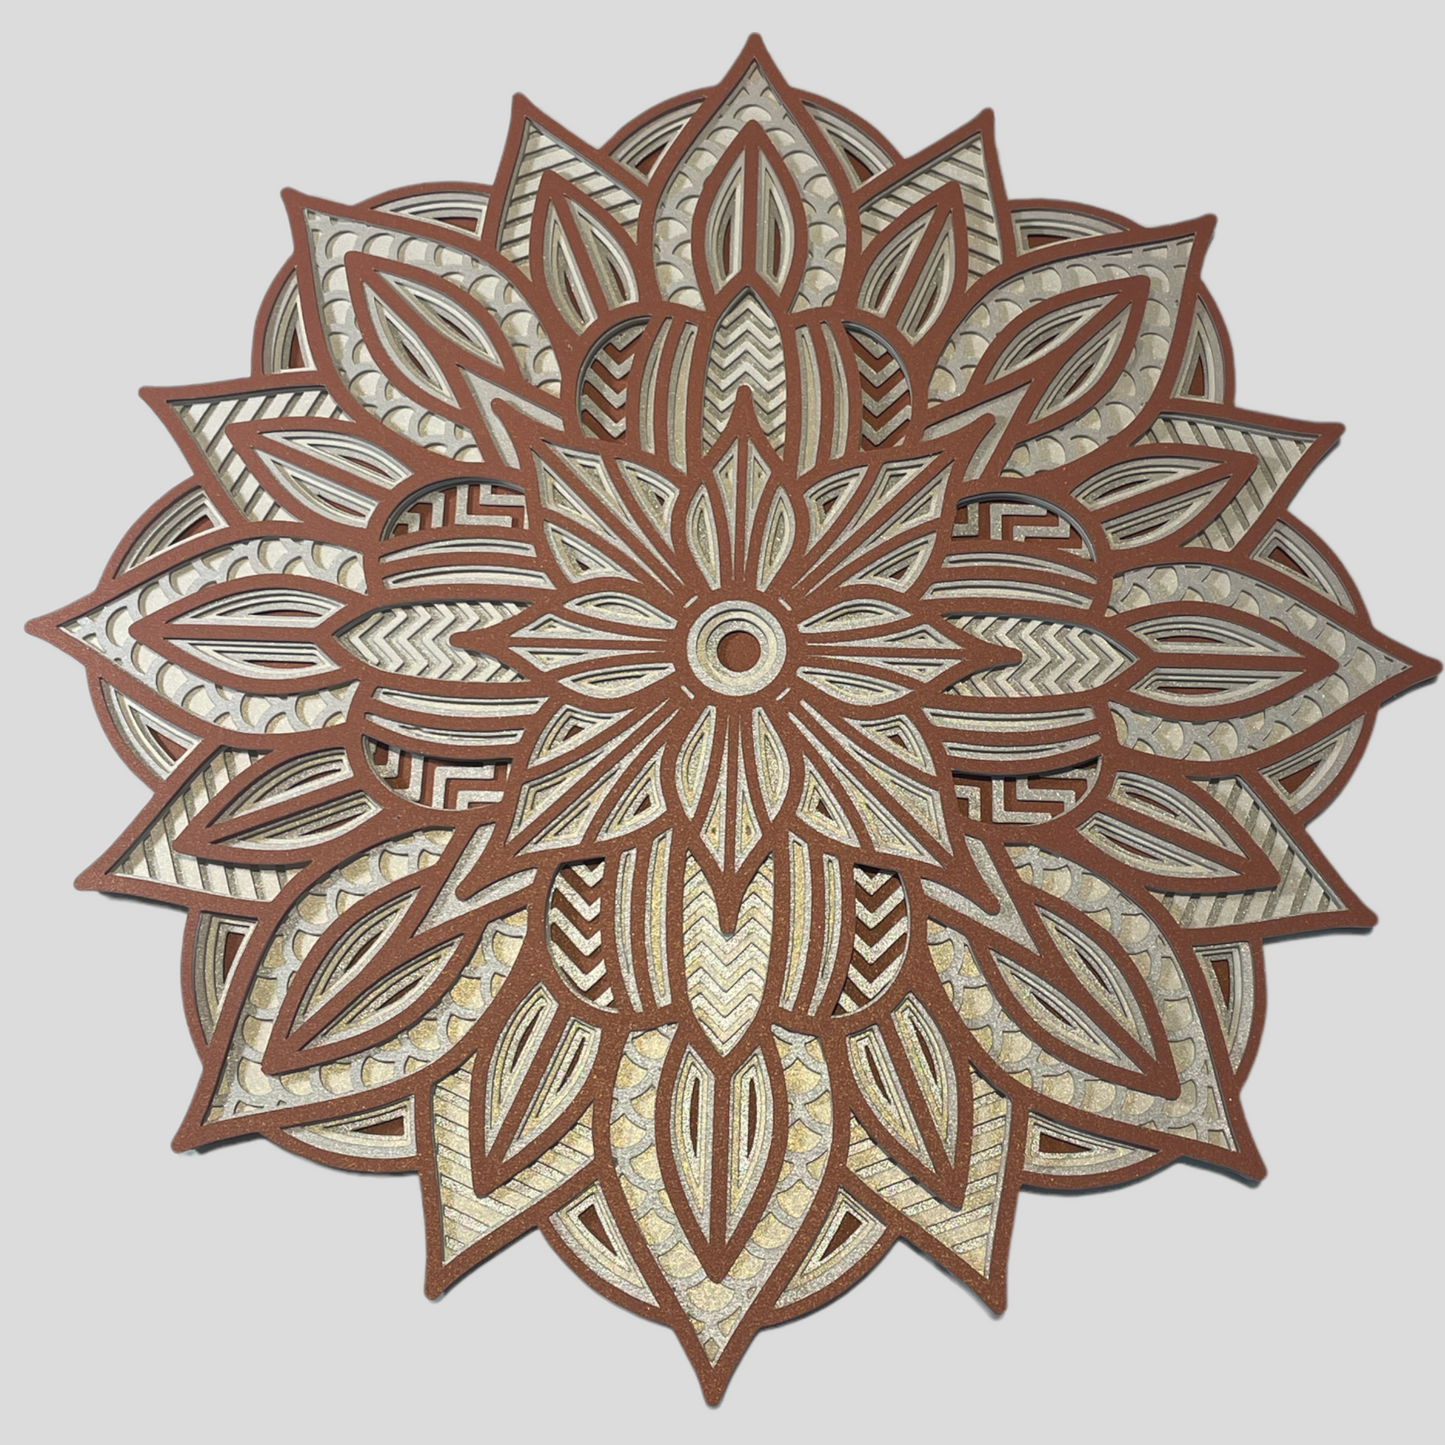 Image showing a 3d Layered Mandala Design which is an instant download SVG design by Home Stitchery Decor.  This 3d Layered Mandala can be cut out with Cricut, Silhouette, CNC or laser machines.  Create your own one-of-a-kind 3d Layered Mandala by following along with the complete tutorial on the Home Stitchery Decor YouTube Channel